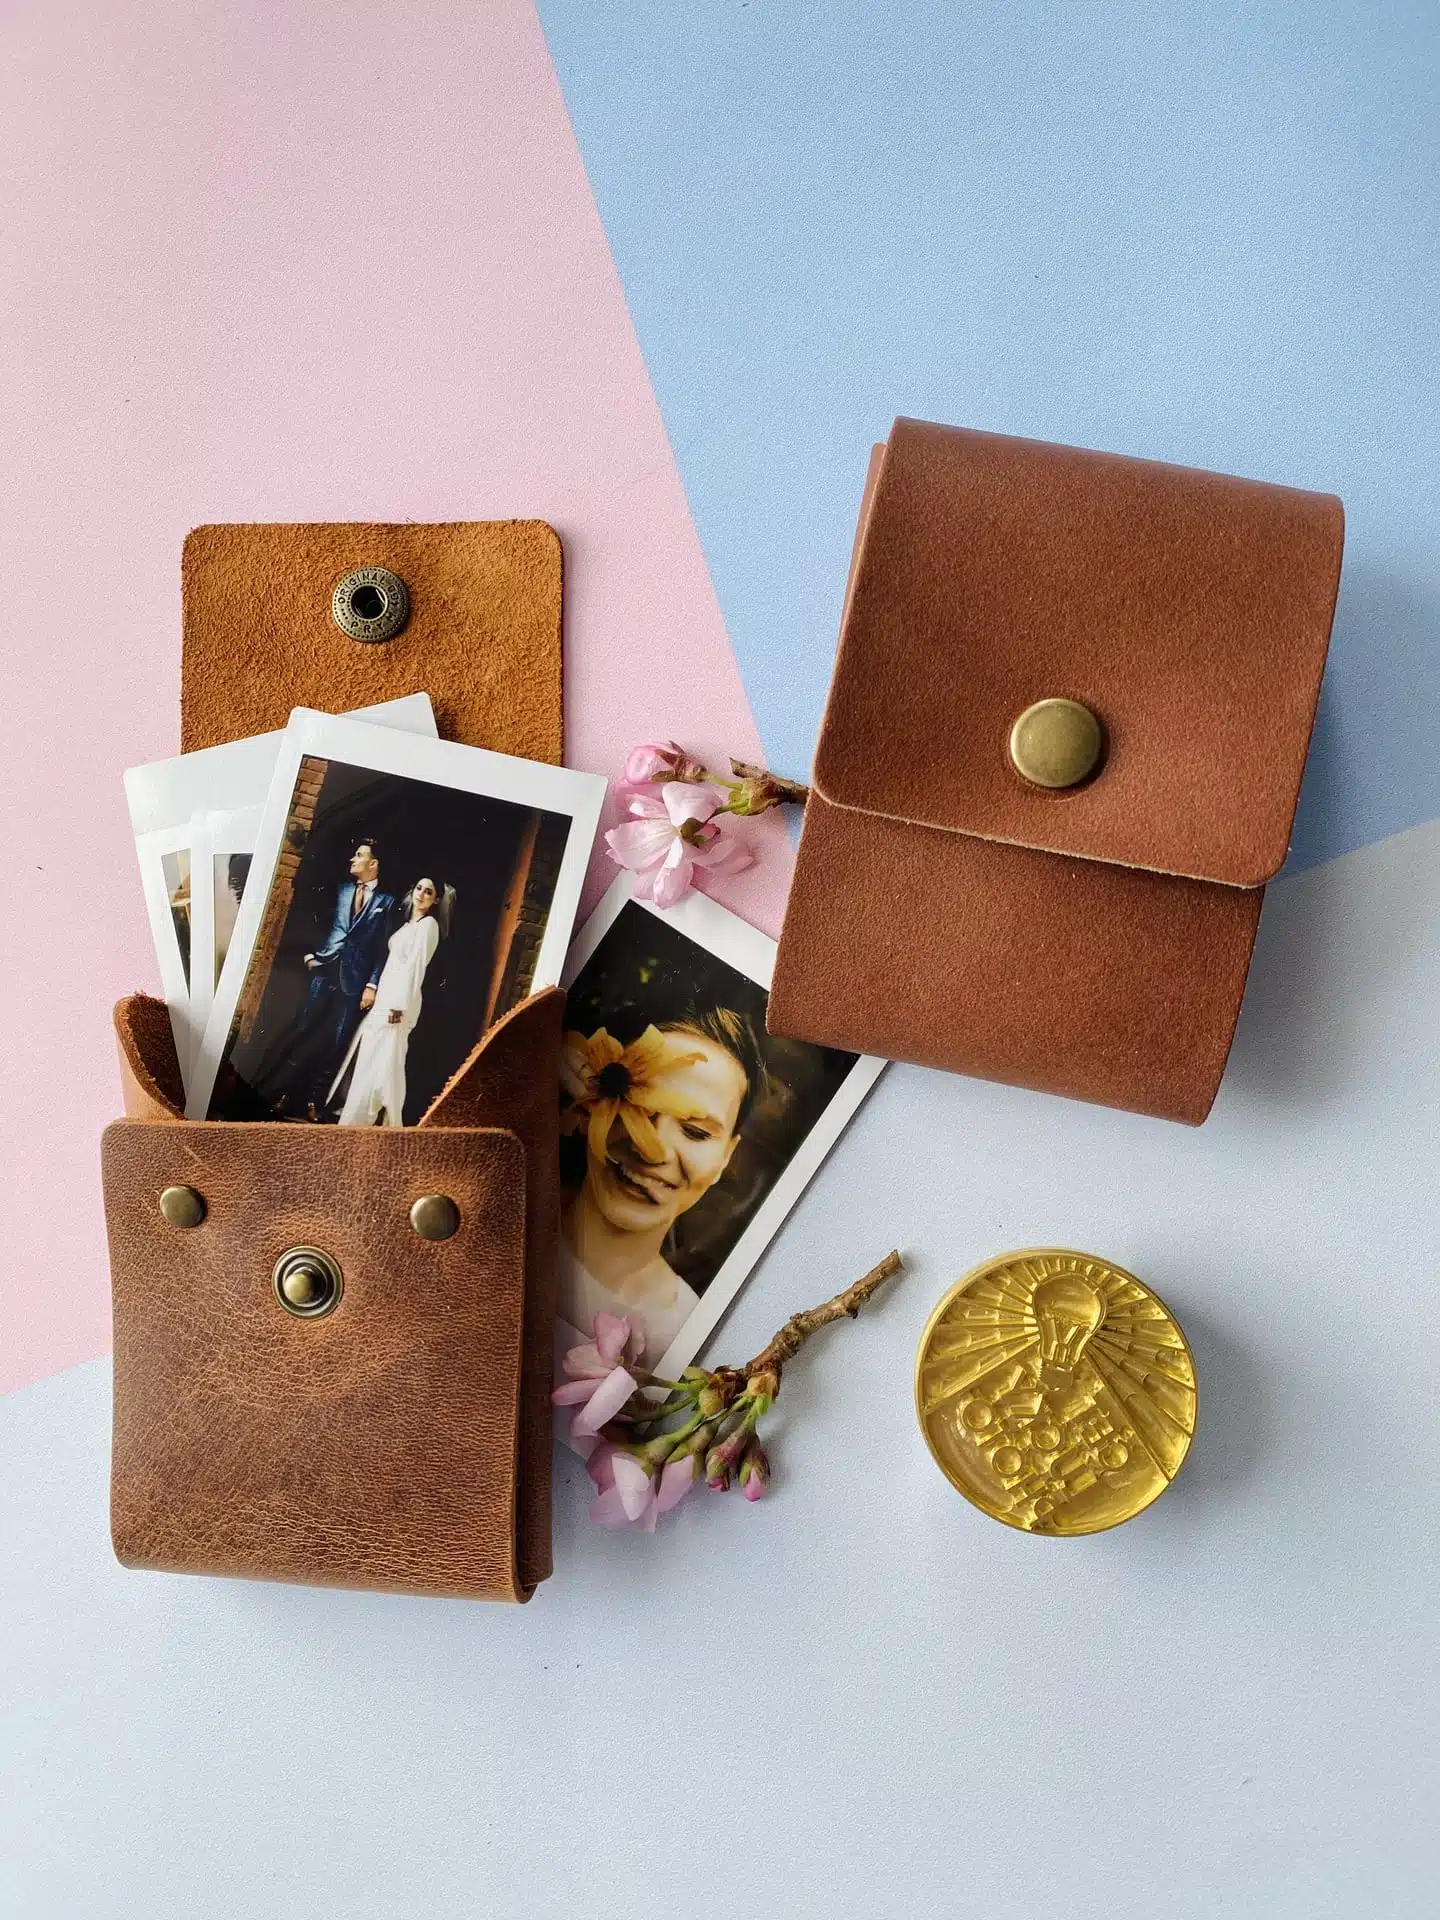 Instax Leather | button closing | size Instax Mini | 8.6×5.4cm | 3.4×2.1″ | real leather envelope for instax prints | handmade polaroid pouch